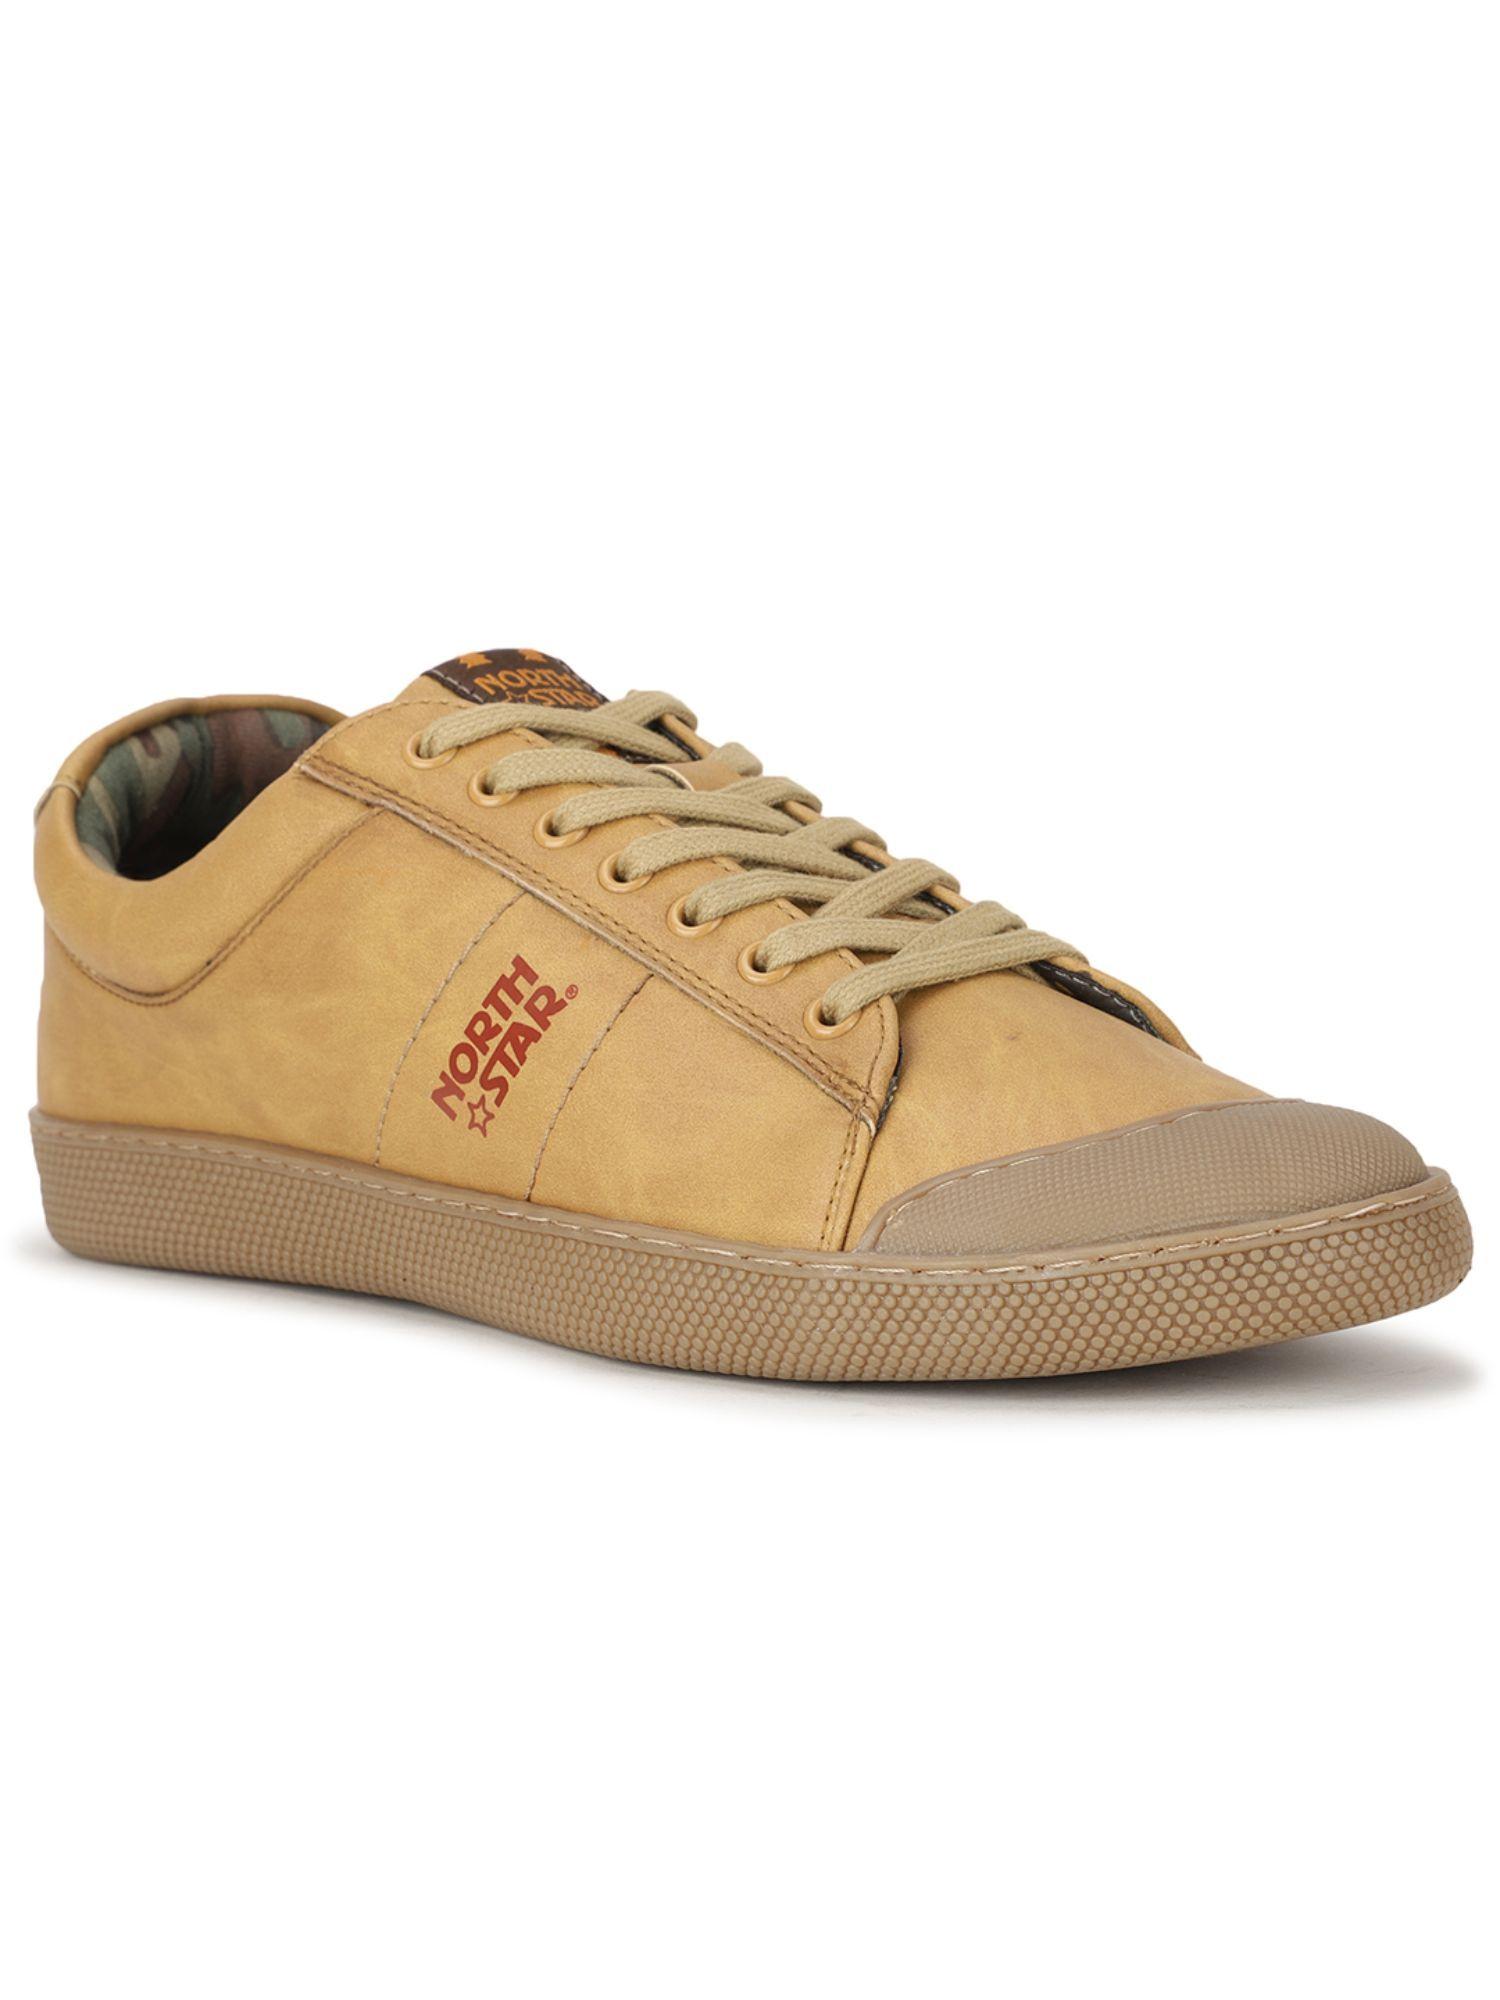 solid tan casual shoes